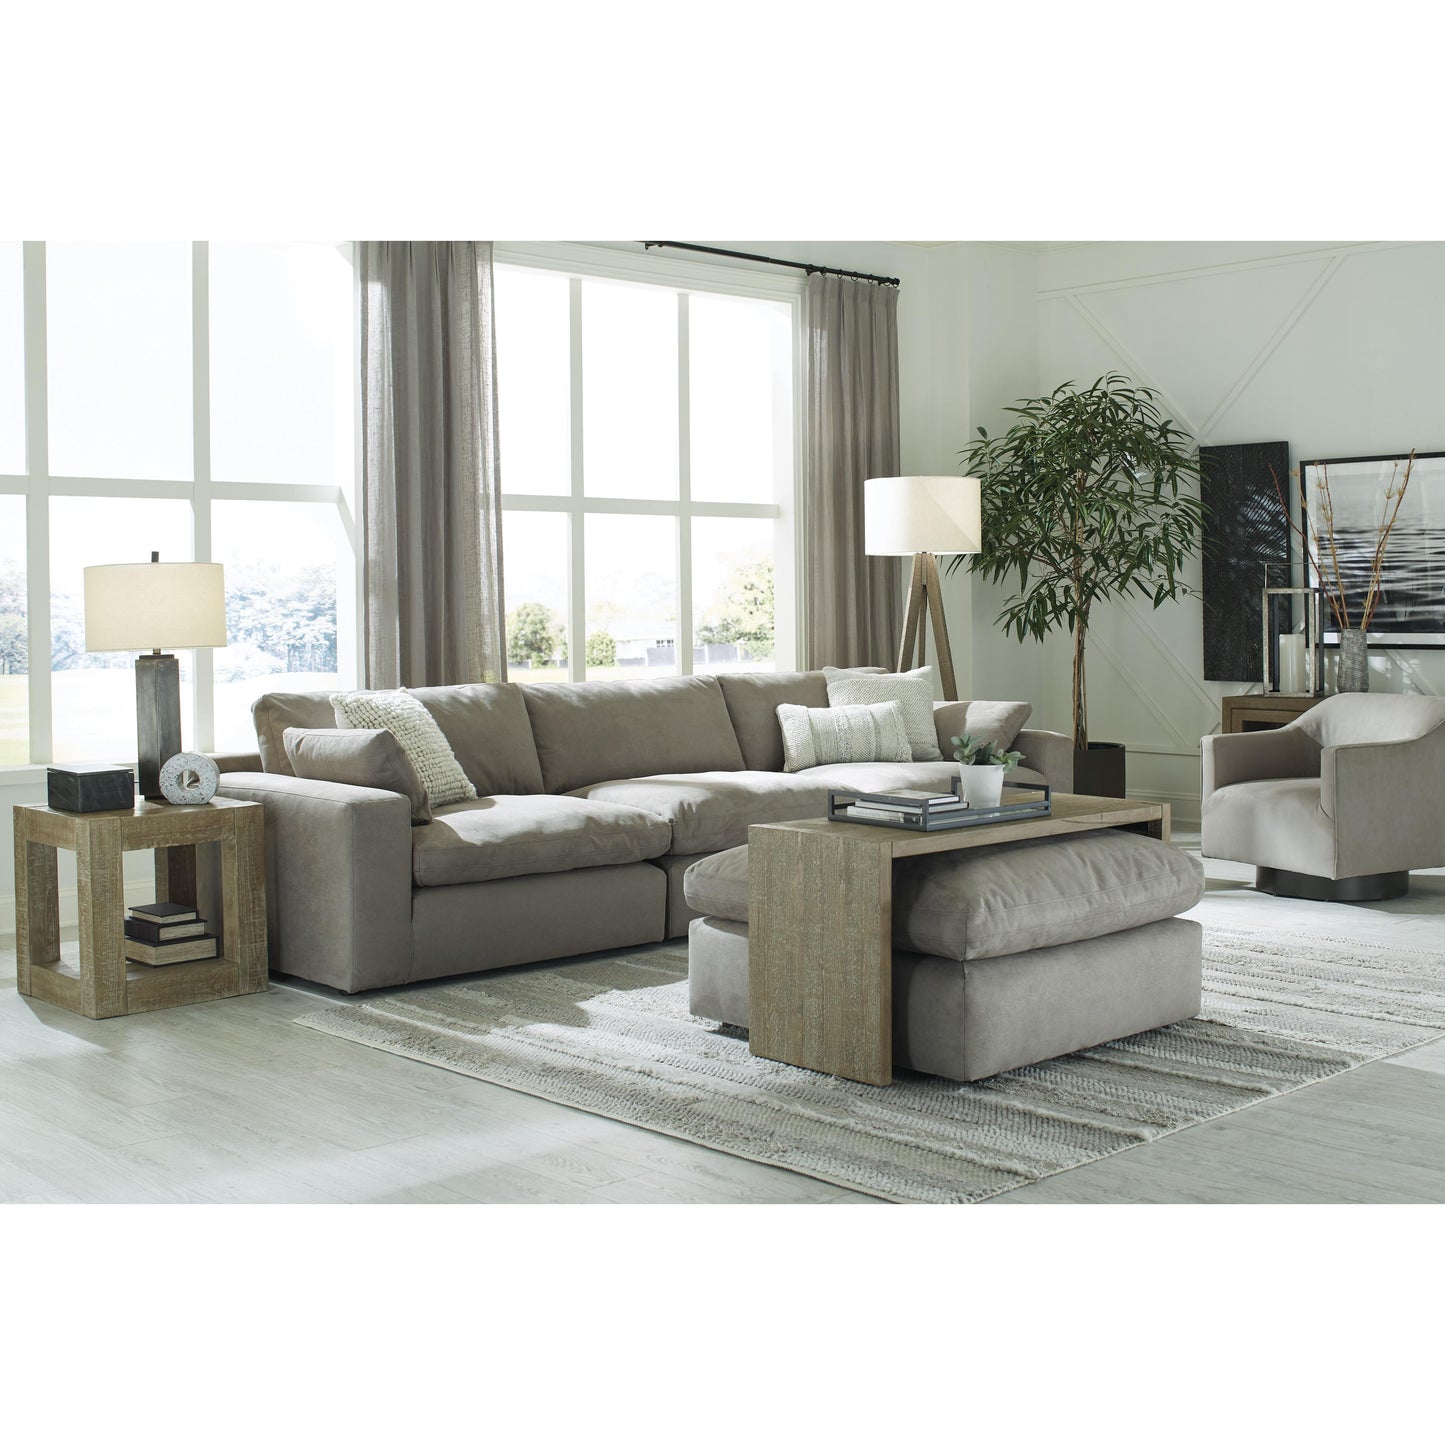 Signature Design by Ashley Next-Gen Gaucho Leather Look 3 pc Sectional 1540364/1540346/1540365 IMAGE 3